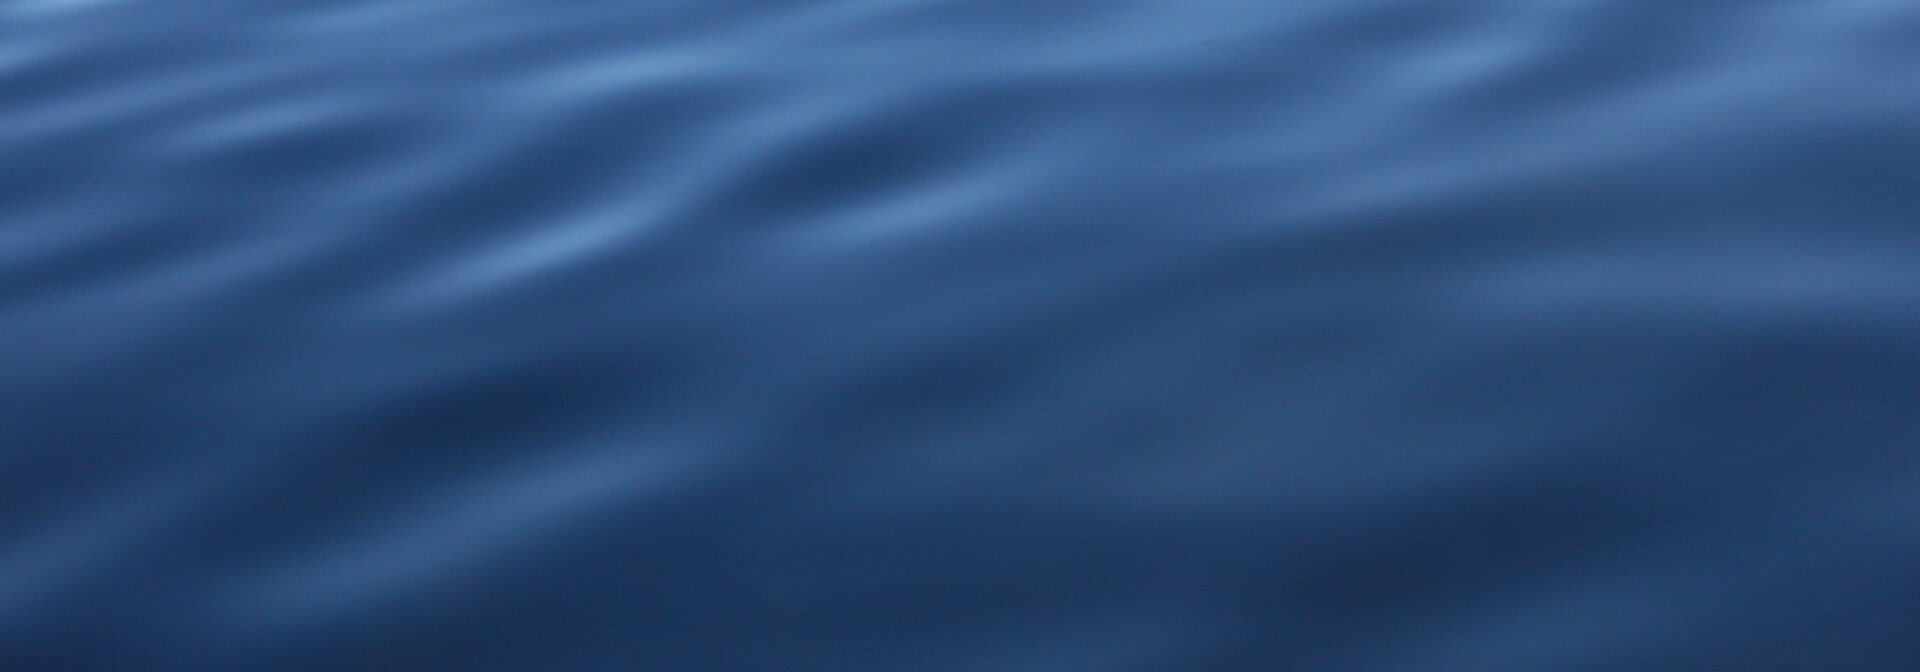 Clean blue water background